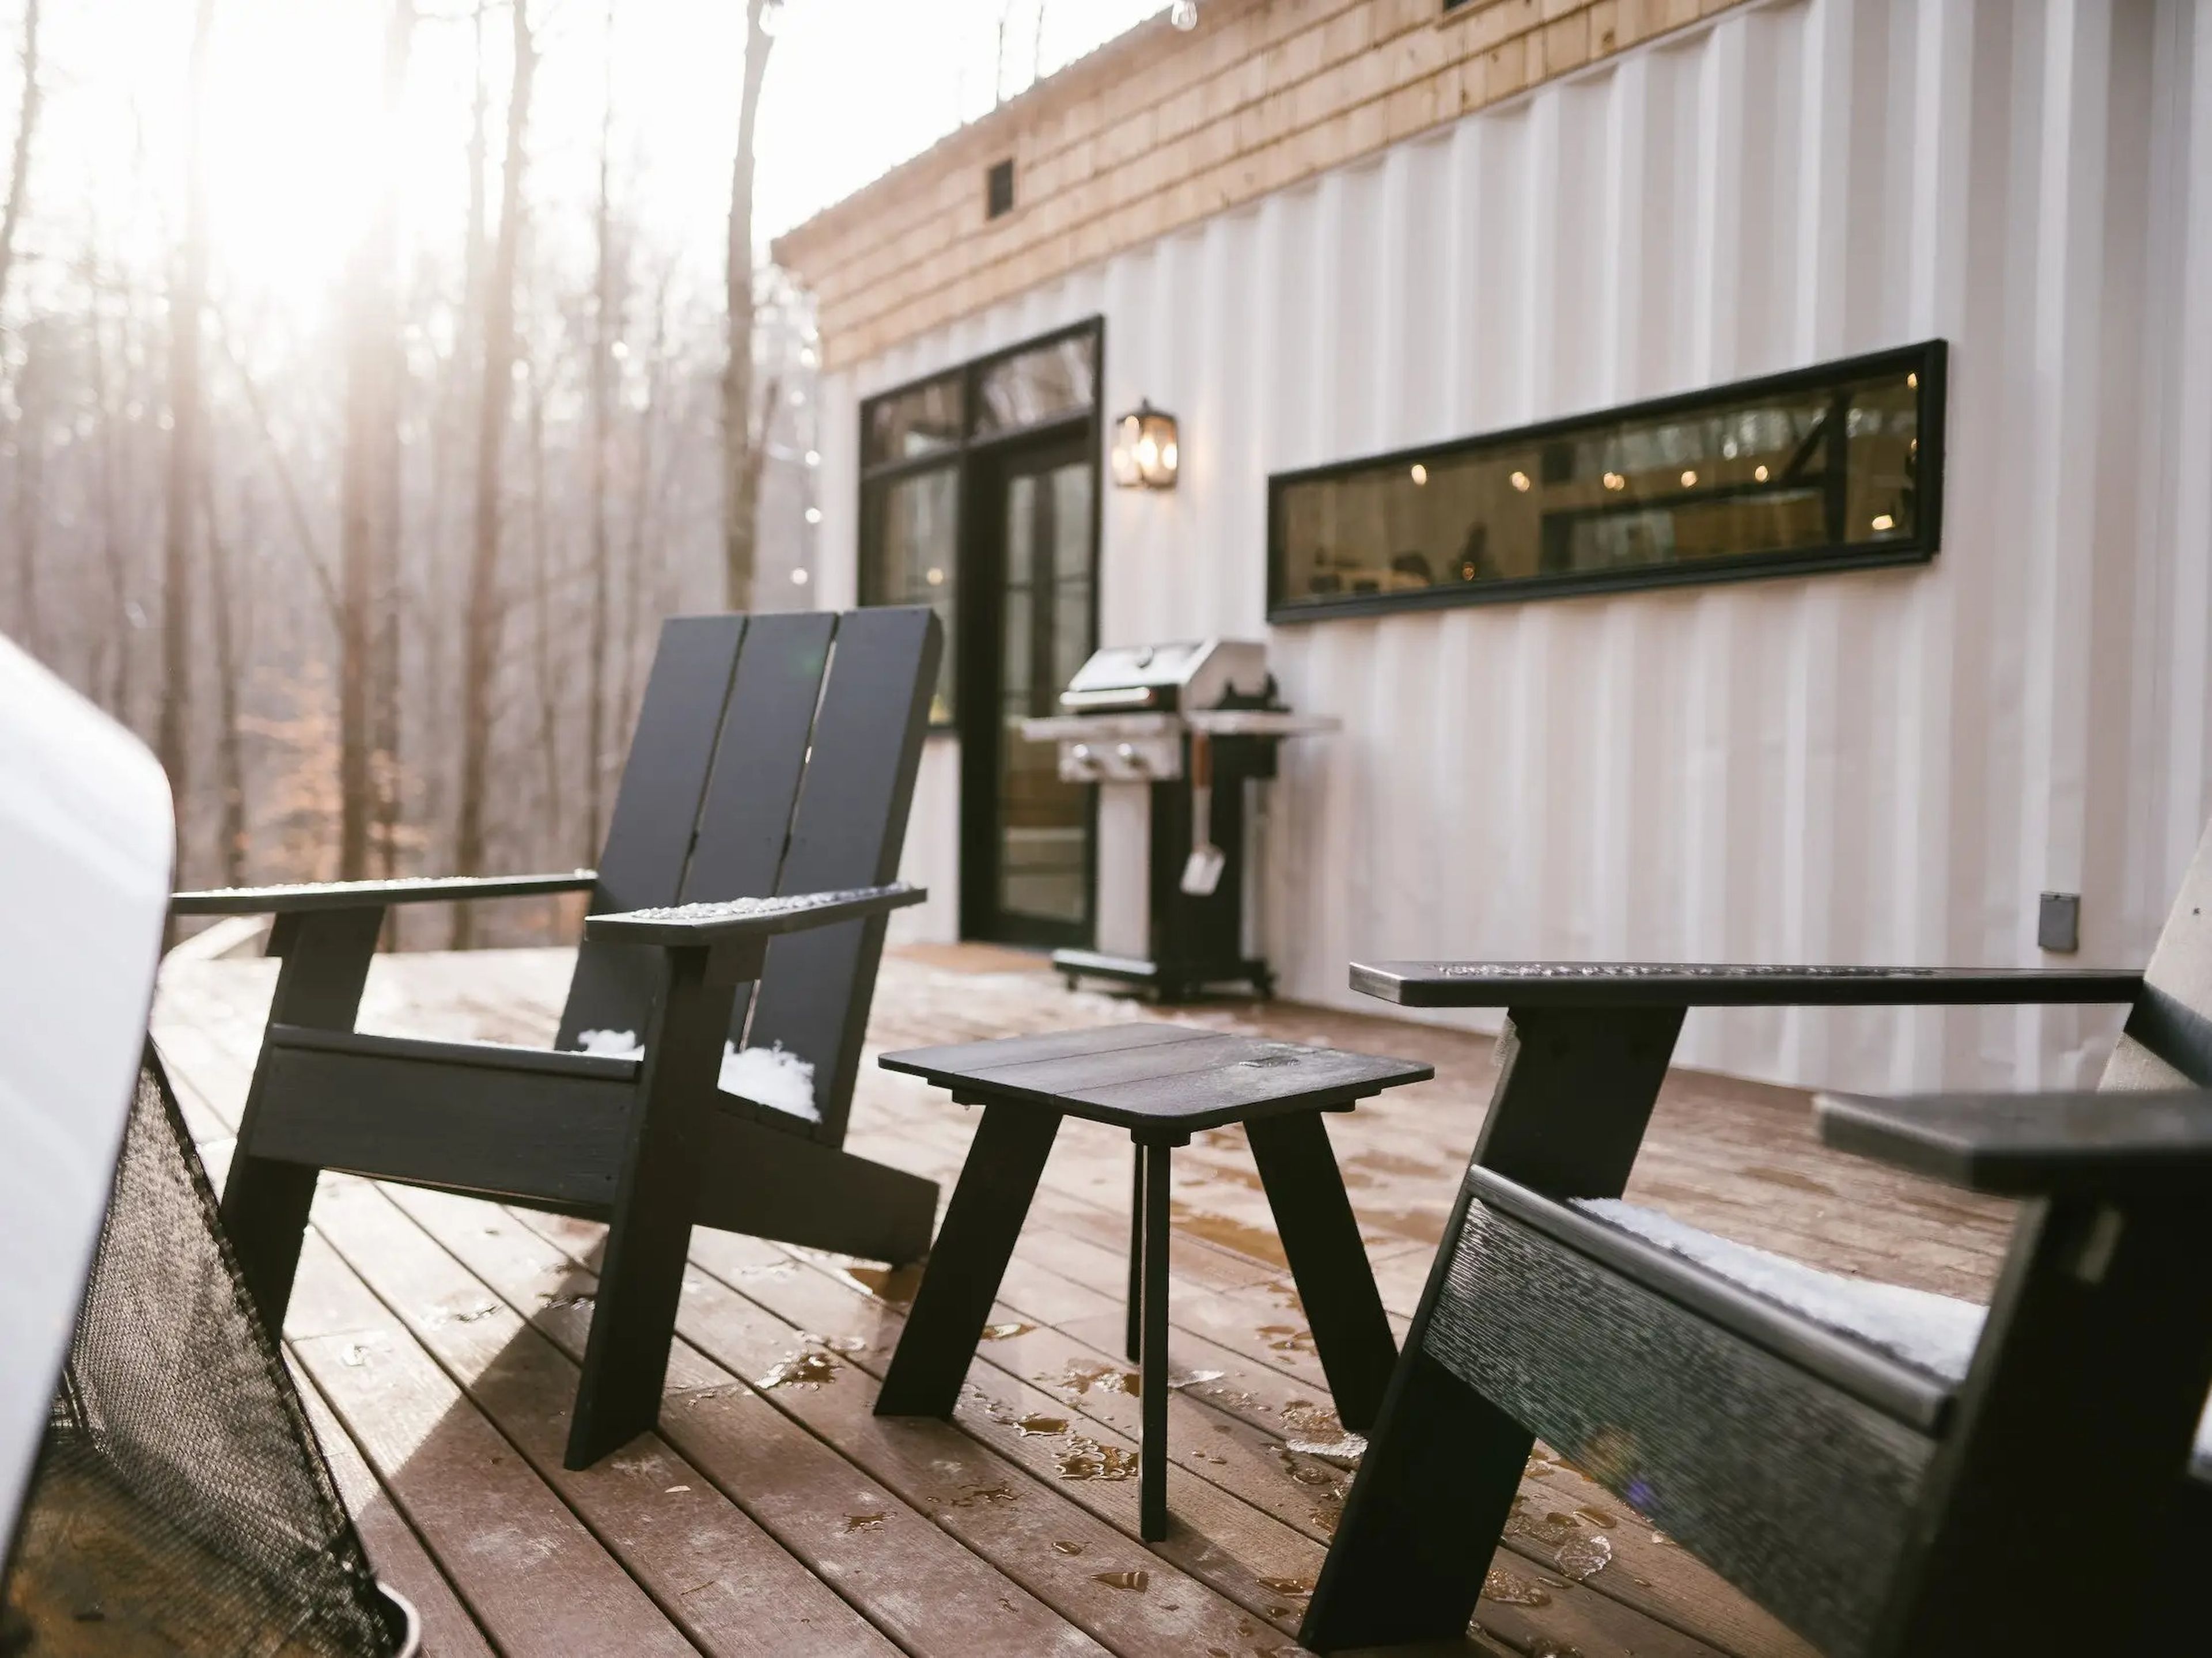 An outdoor deck with chairs at a shipping container home.